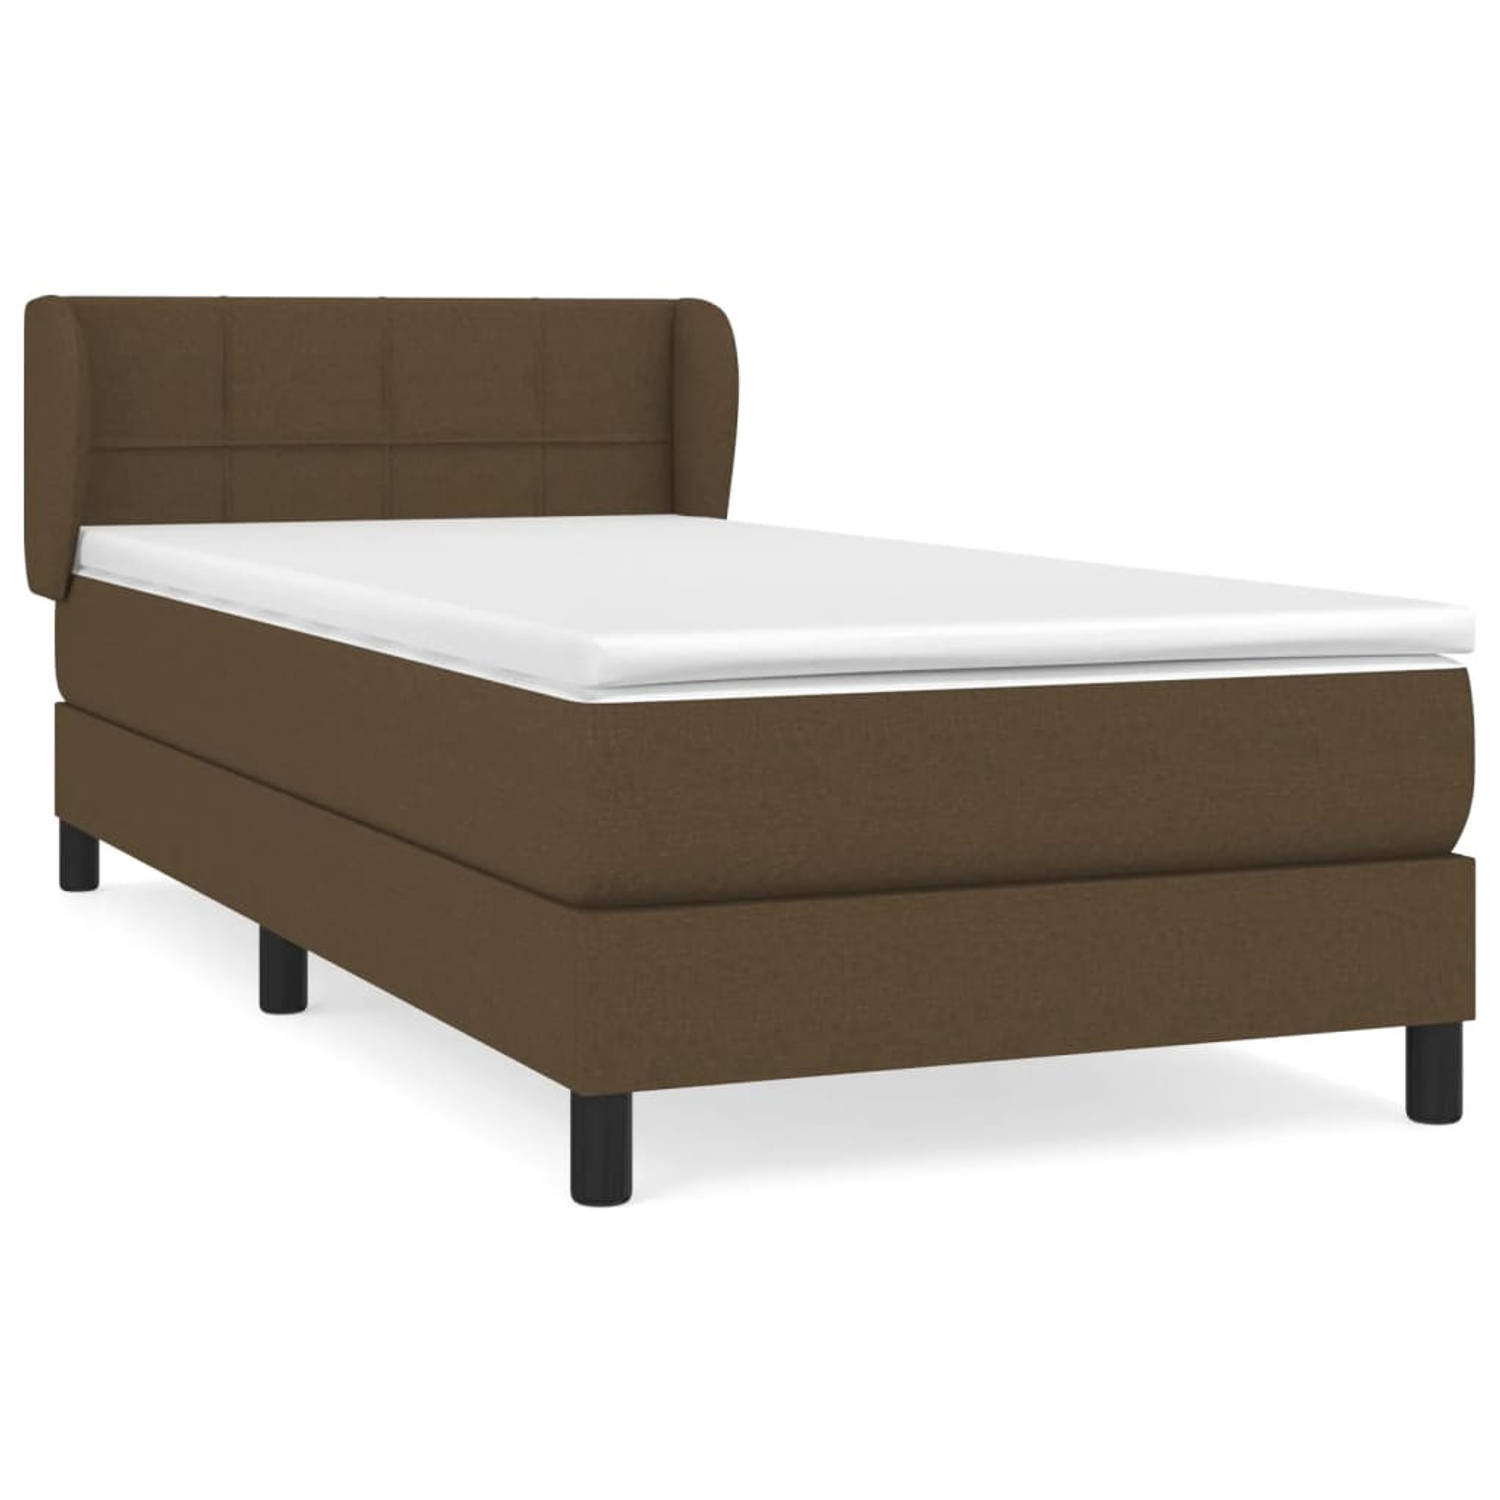 The Living Store Boxspringbed - Donkerbruin - 203 x 83 x 78/88 cm - Ademend en Duurzaam